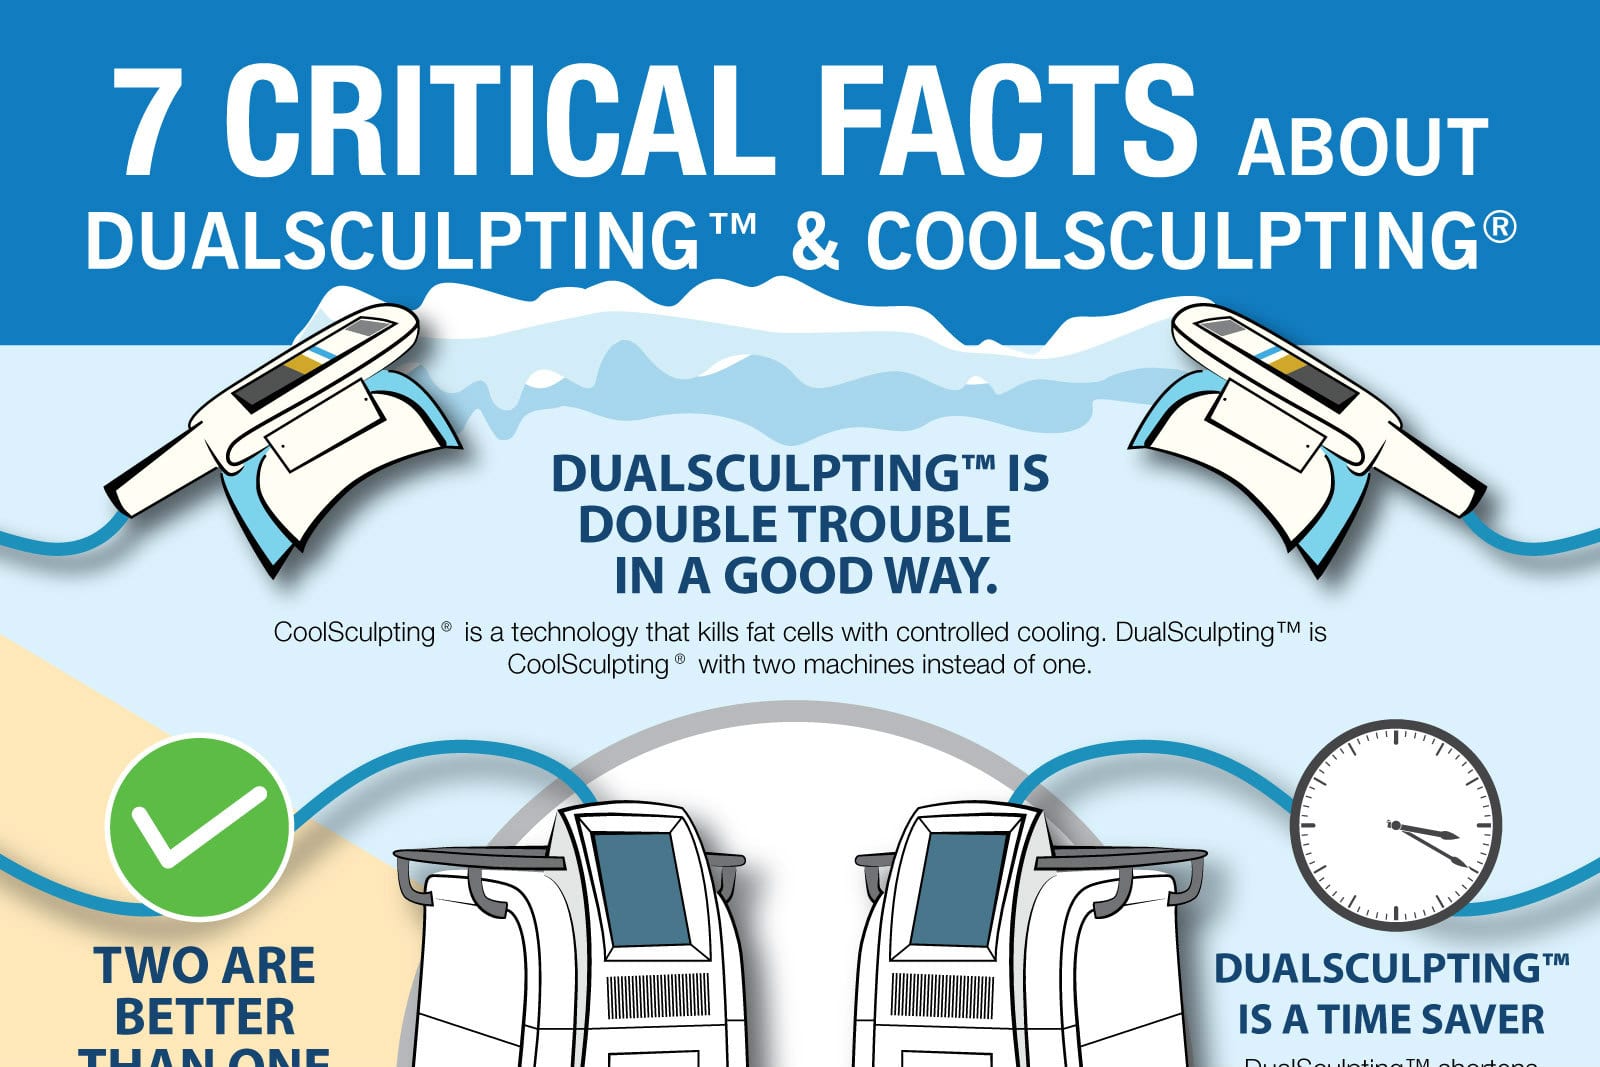 7 Critical Facts About DualSculpting & CoolSculpting [Infographic]